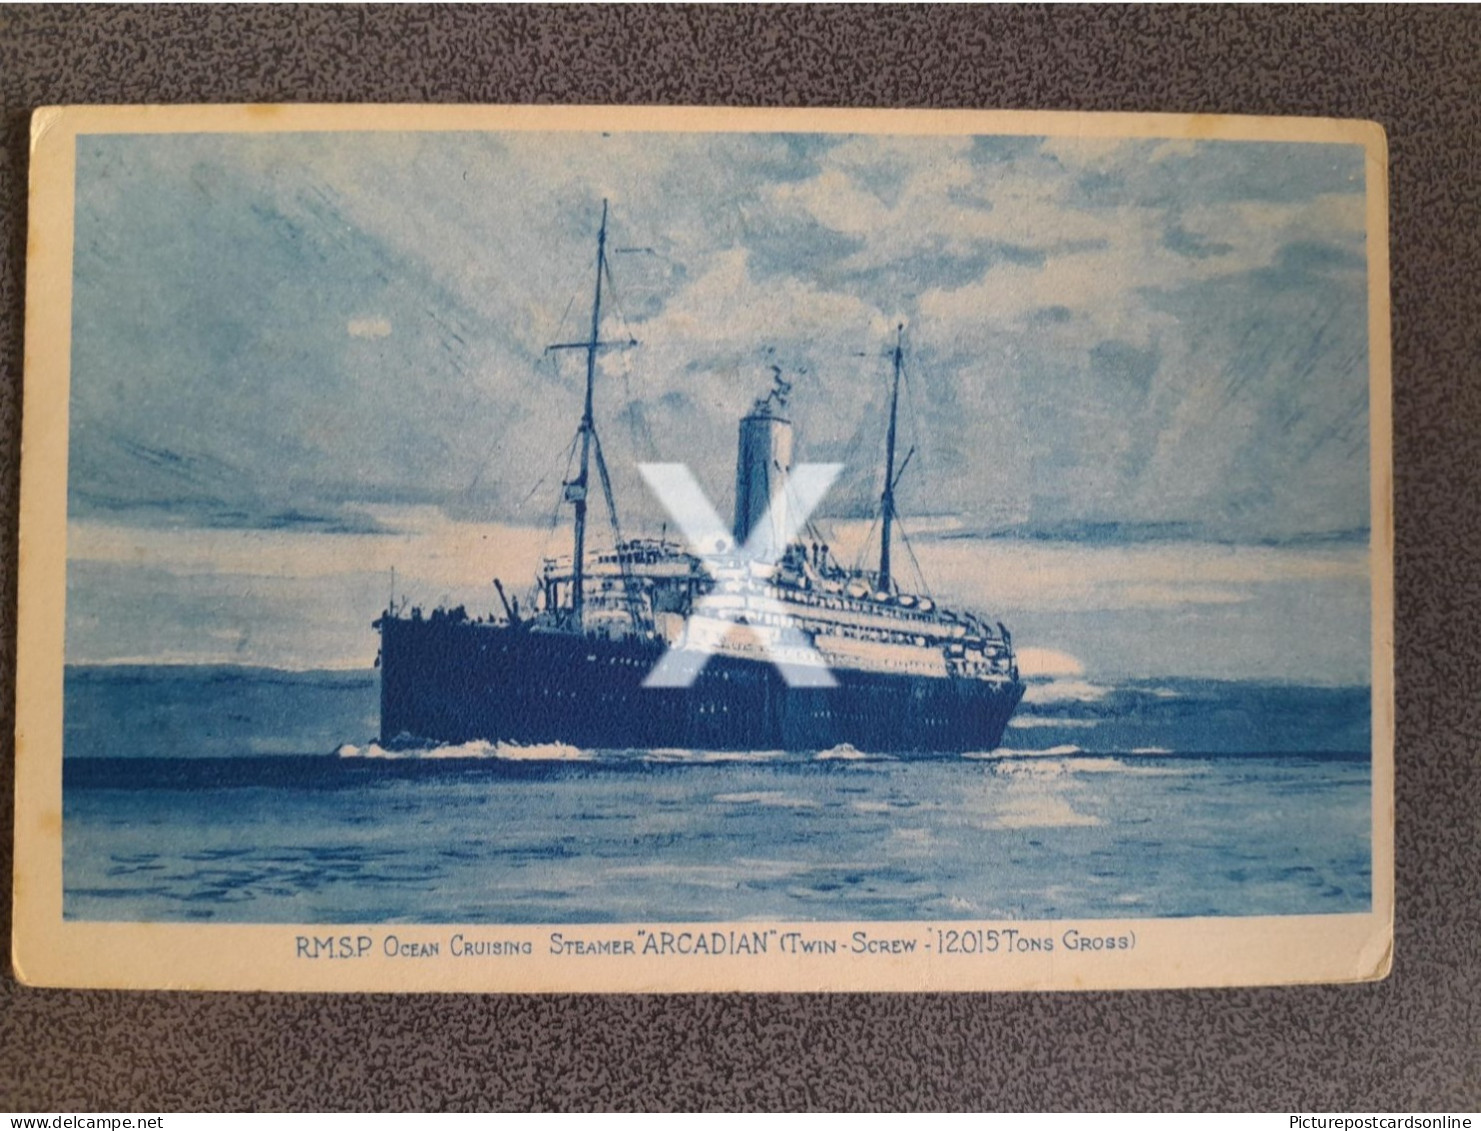 ROYAL MAIL STEAM PACKET R.MS.P. OCEAN CRUISING STEAMER ARCADIAN OLD B/W POSTCARD STEAMER SHIPPING - Paquebots